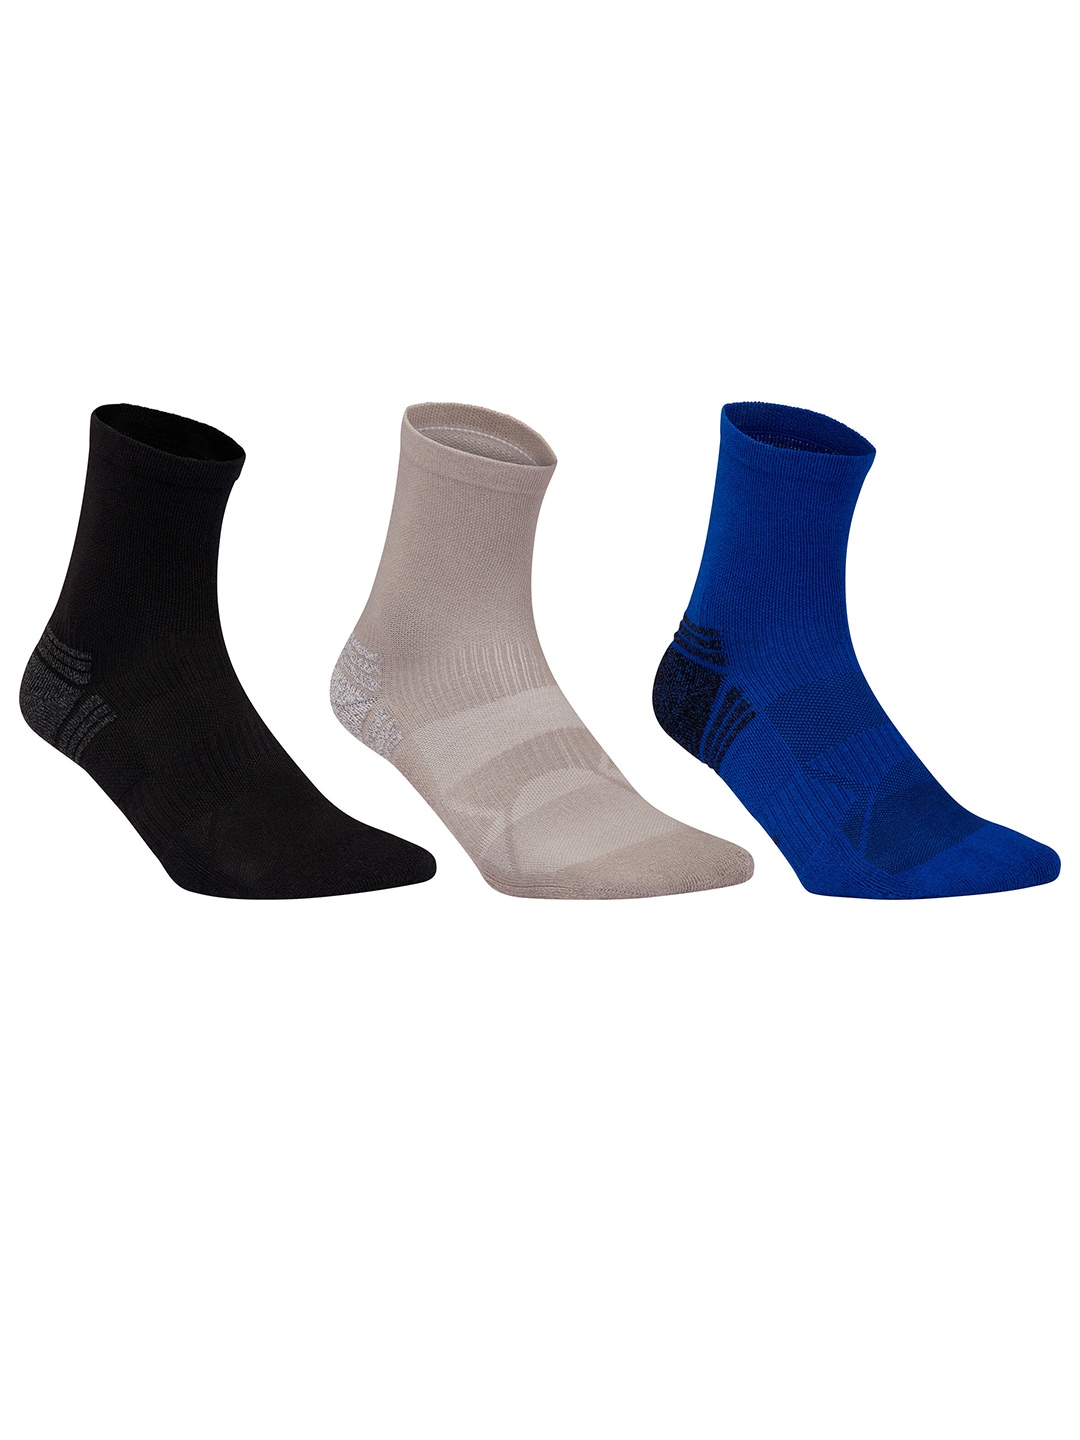 Newfeel By Decathlon Unisex Pack Of 3 Above Ankle Socks Price in India